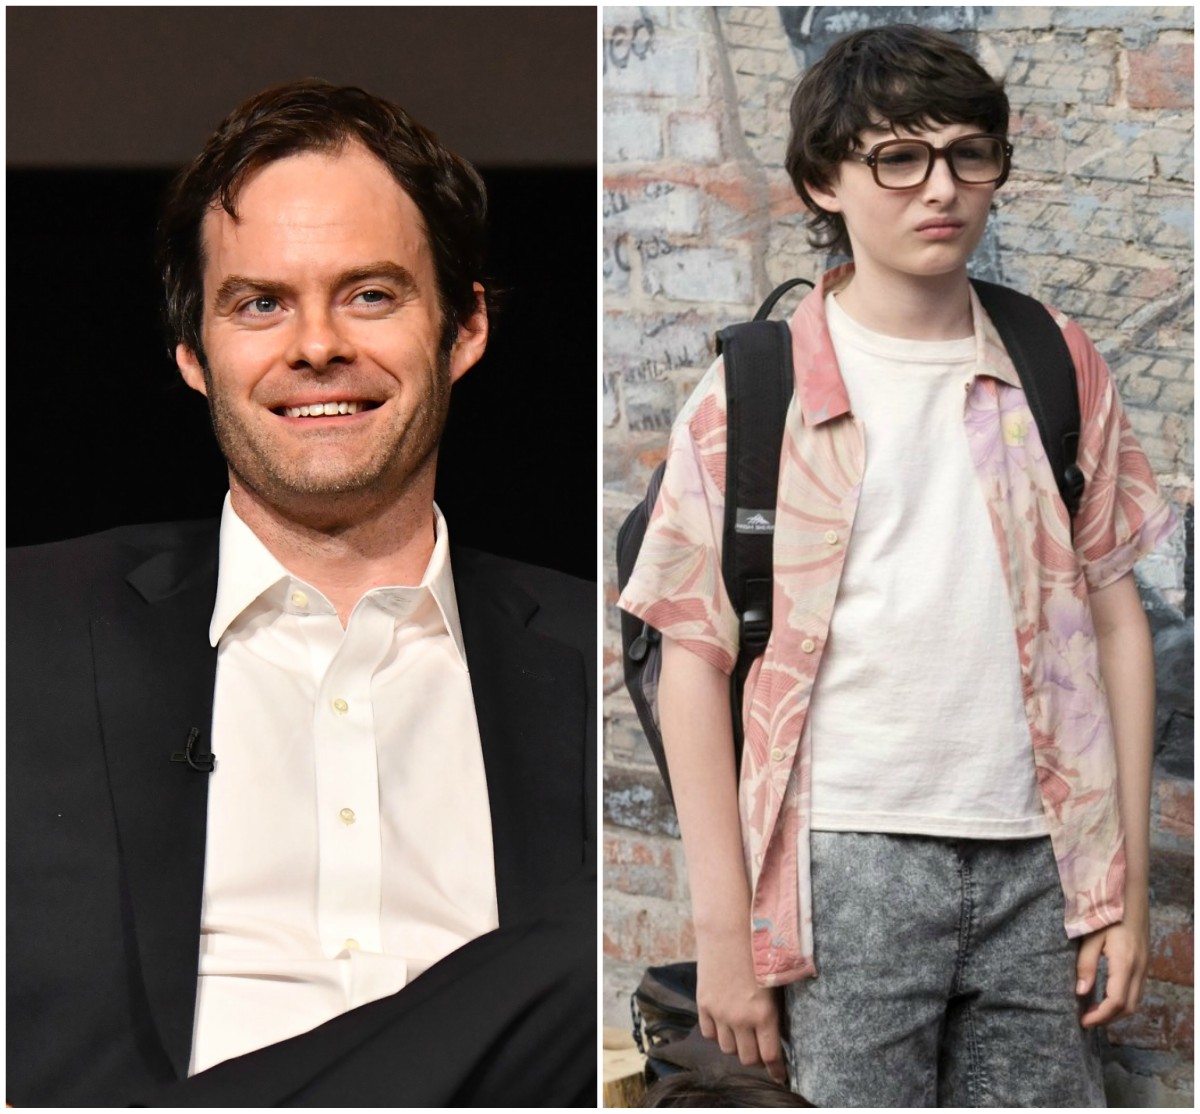 Bill Hader as Richie Tozier